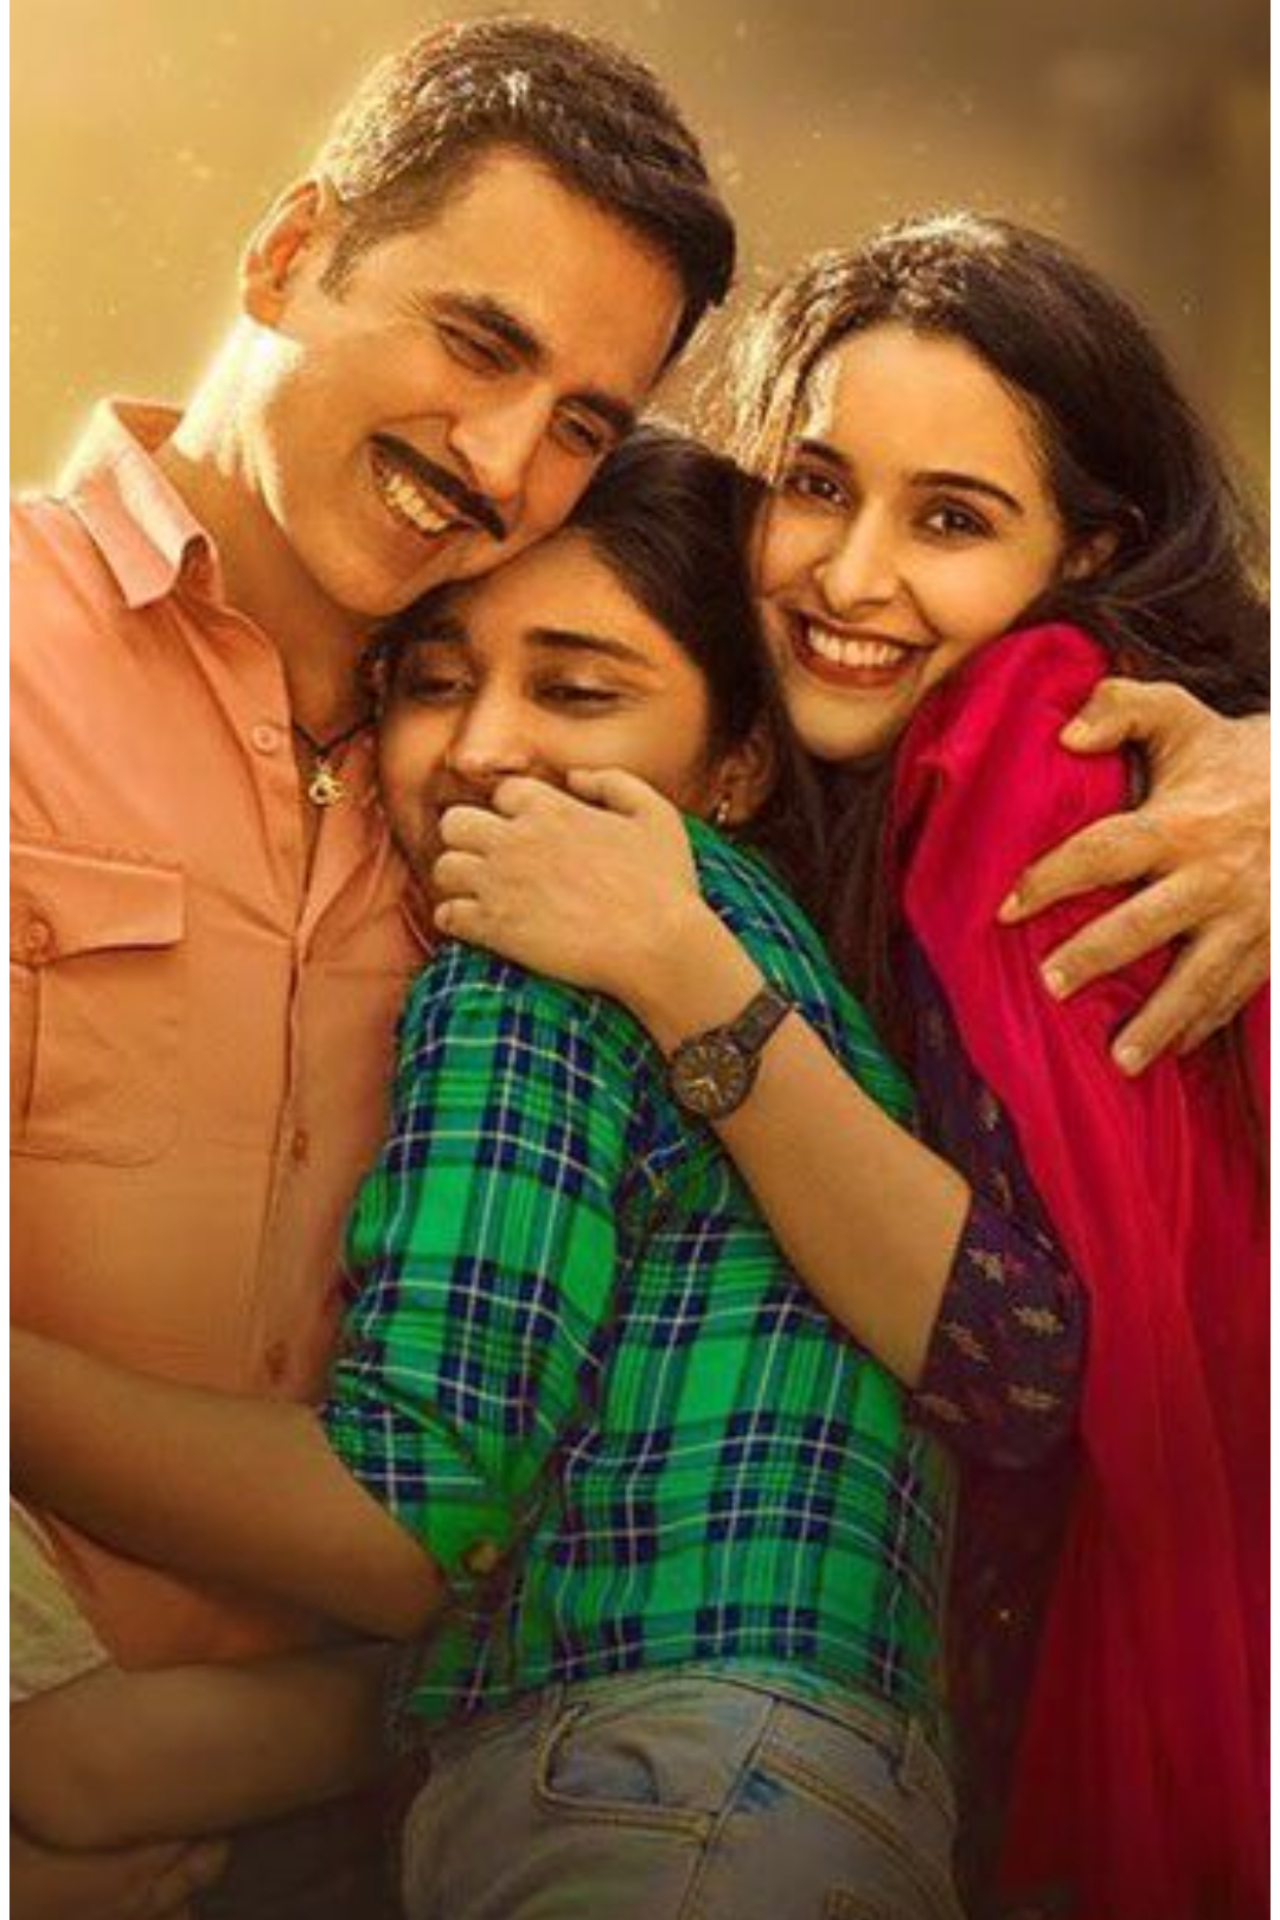 Akshay Kumar will seen as a loving and caring brother to four sisters in the film Raksha Bandhan.